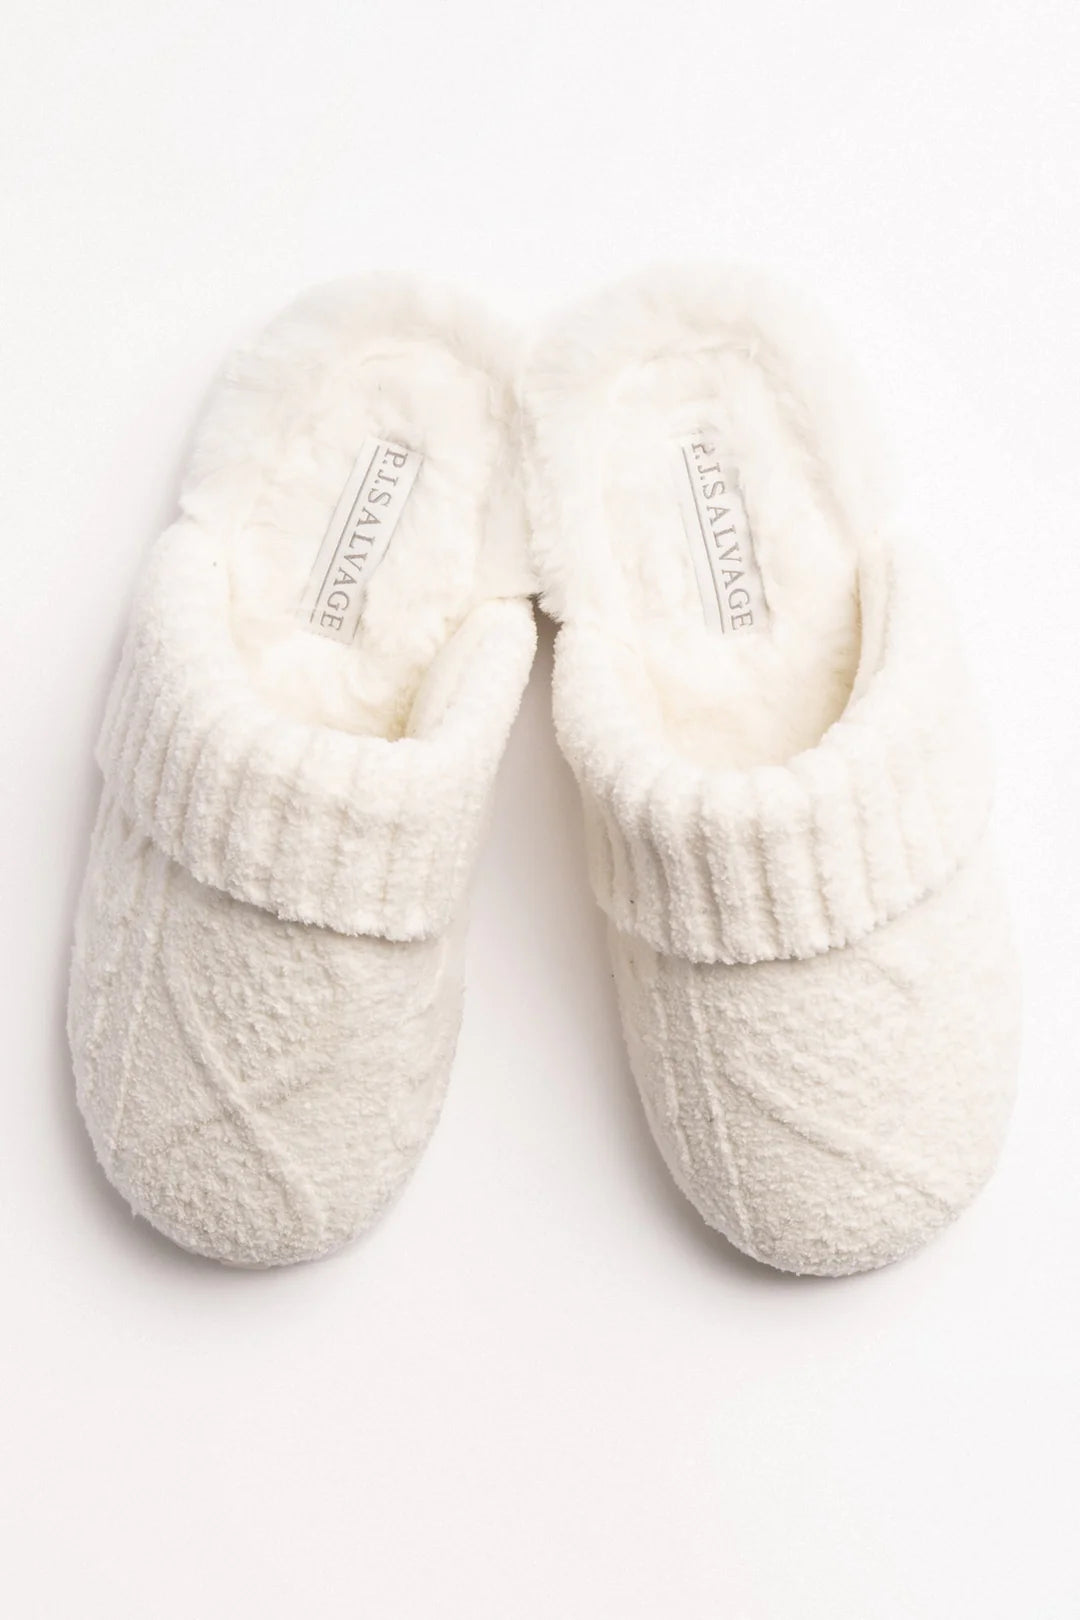 Cable Knit Slippers